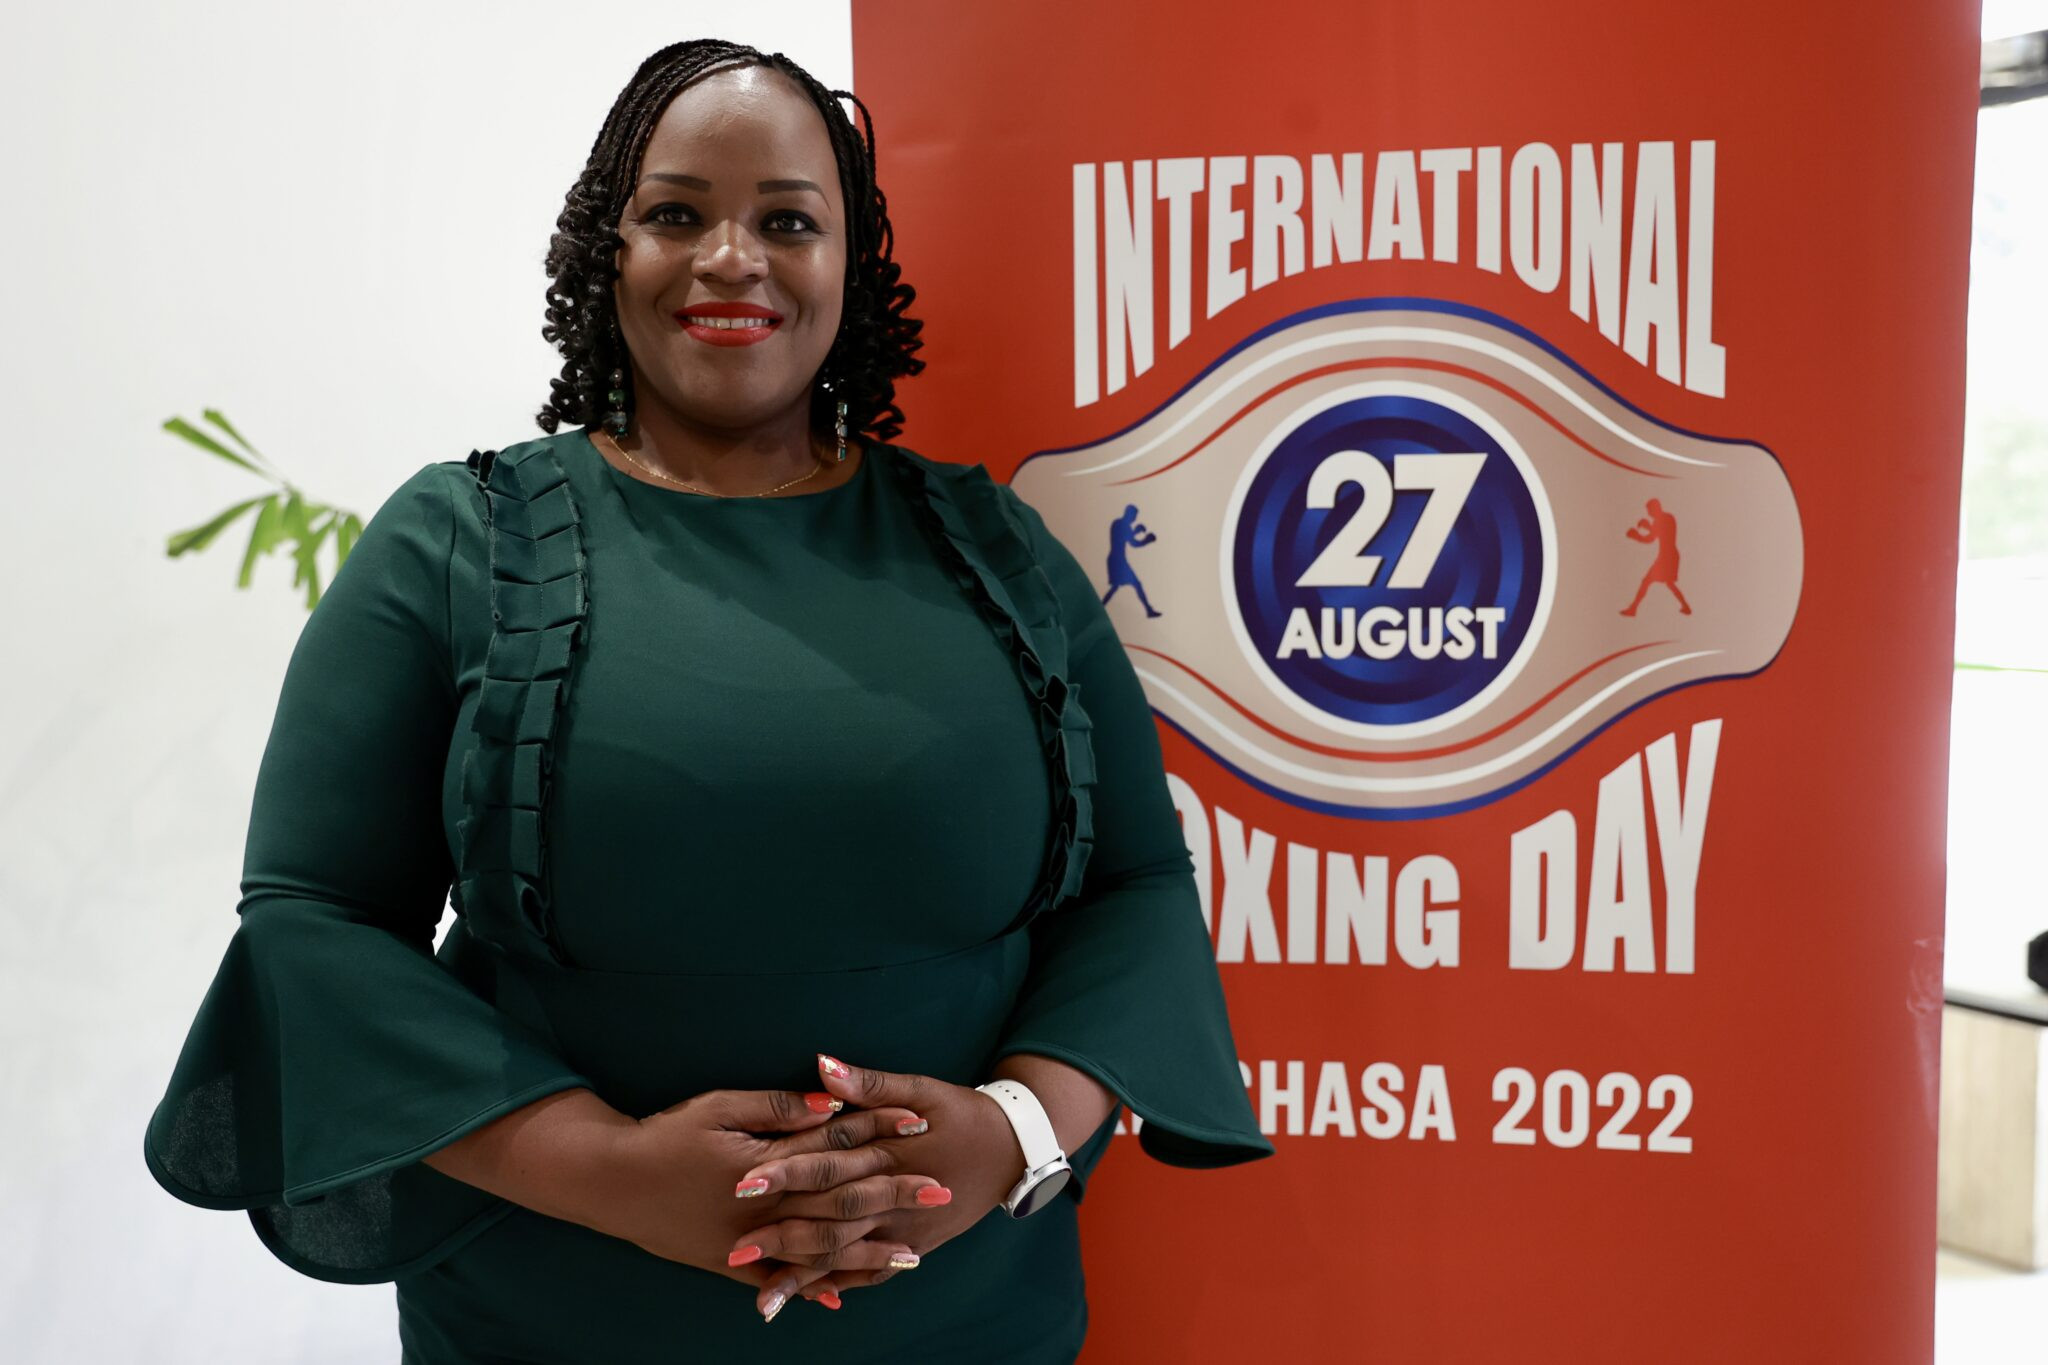 IBA Board member Pearl Dlamini has spoken of the need for the IBA and IOC to be transparent with one another ©IBA